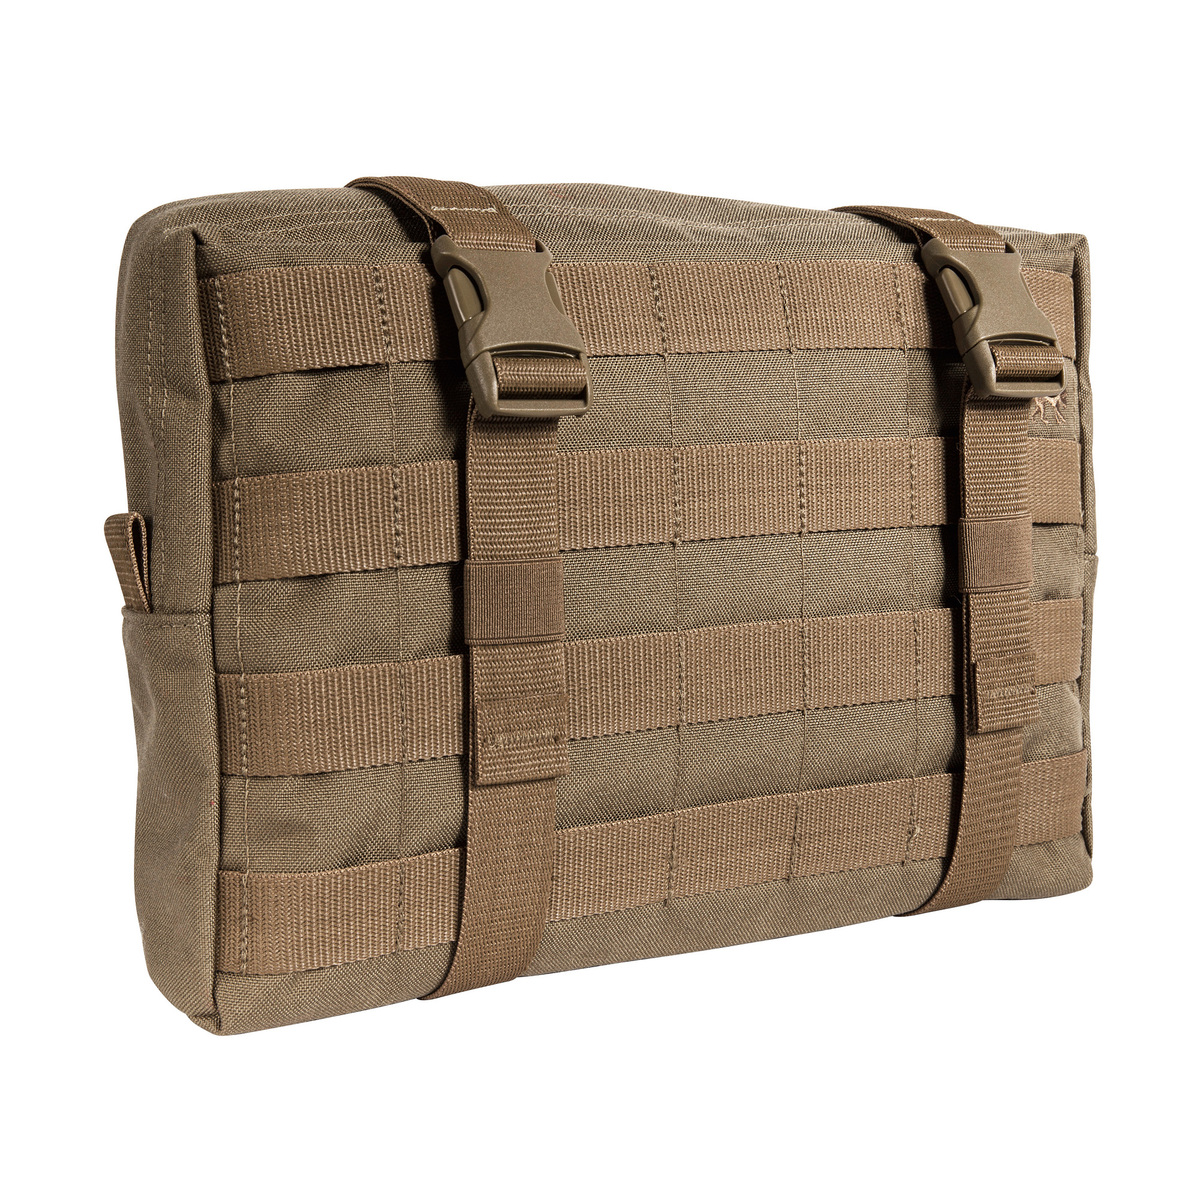 Tac Pouch 10 Coyote brown